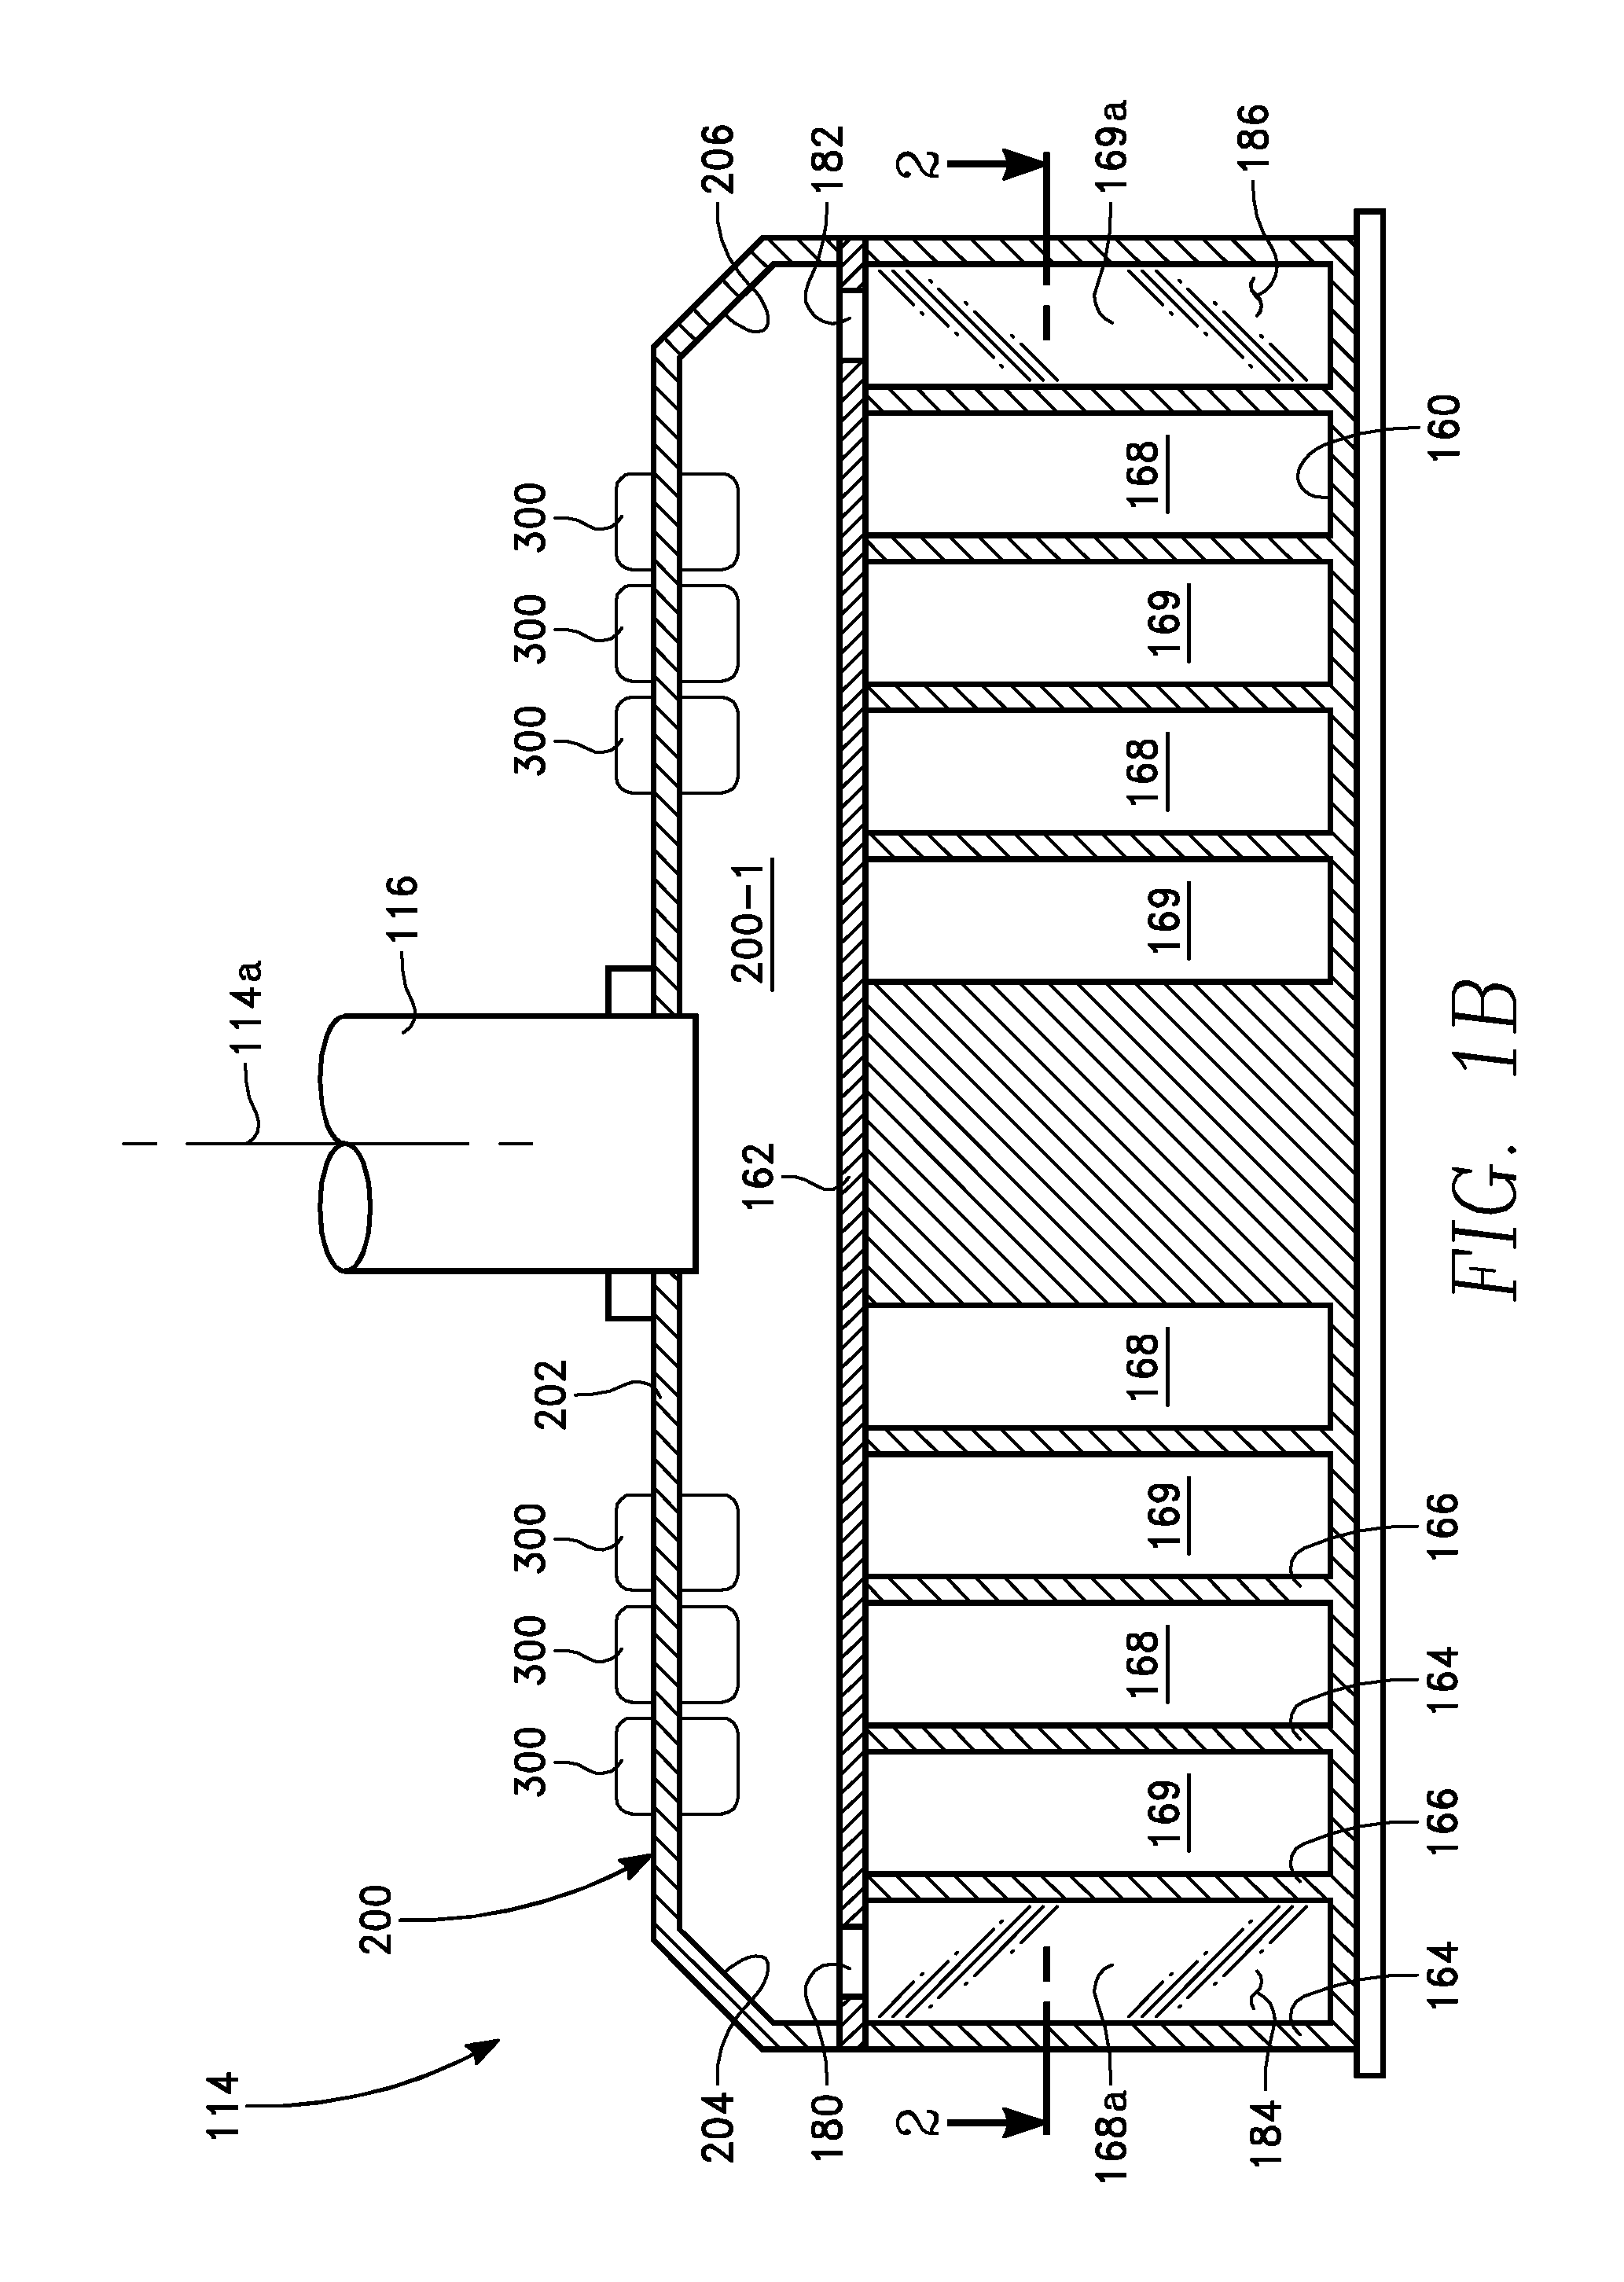 Workpiece processing chamber having a rotary microwave plasma antenna with slotted spiral waveguide